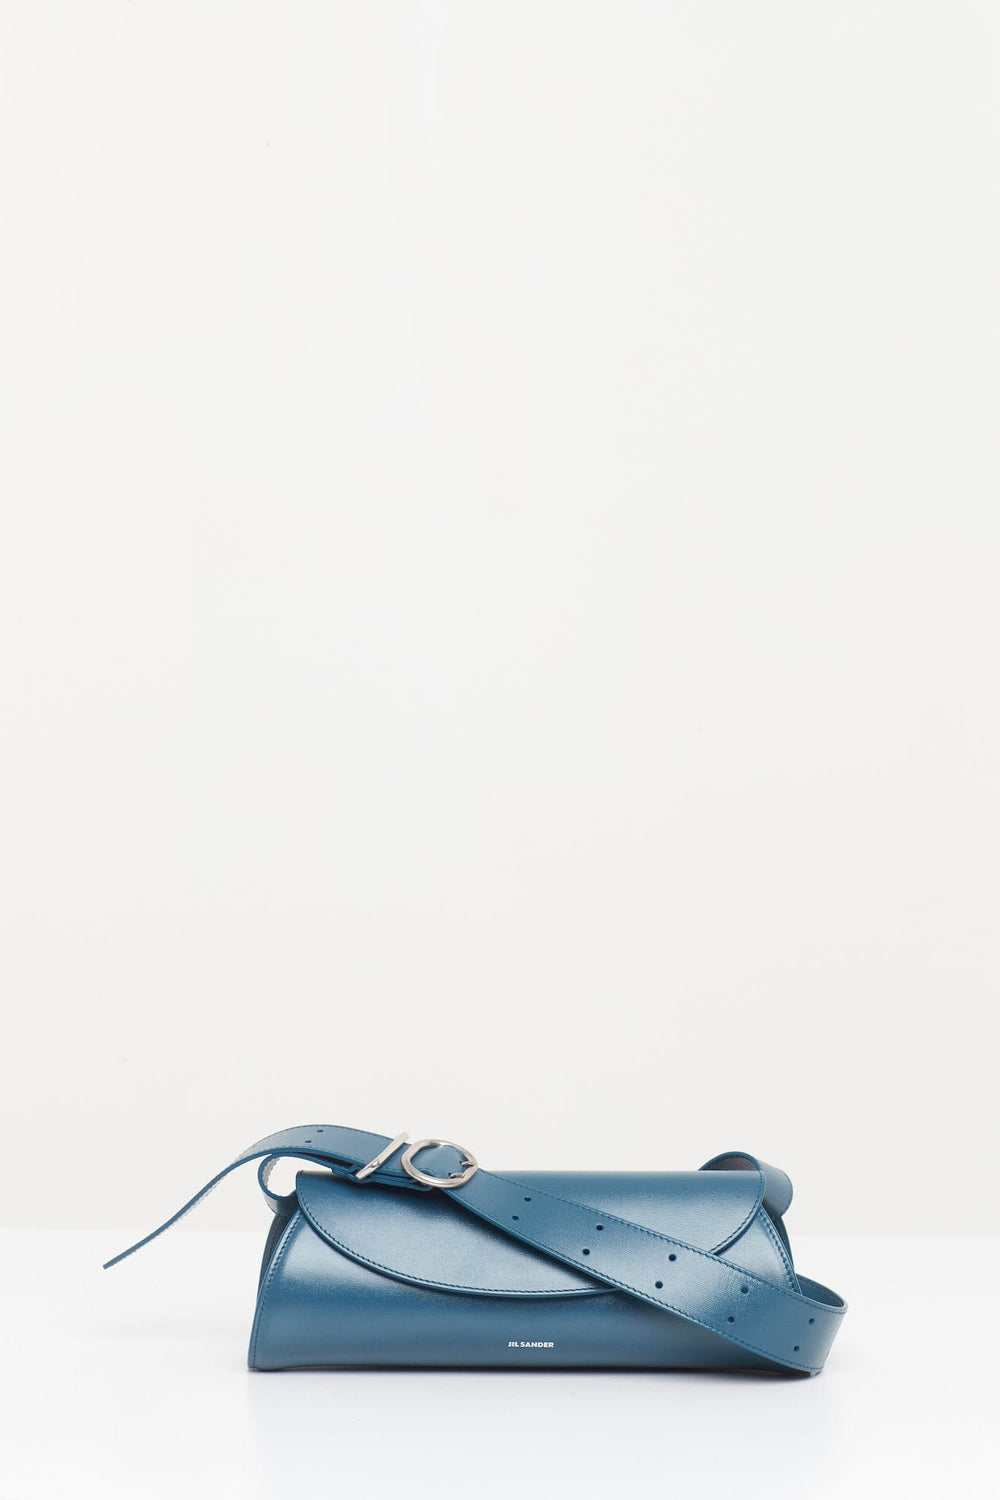 Jil Sander Cannolo SM – Antidote Fashion and Lifestyle